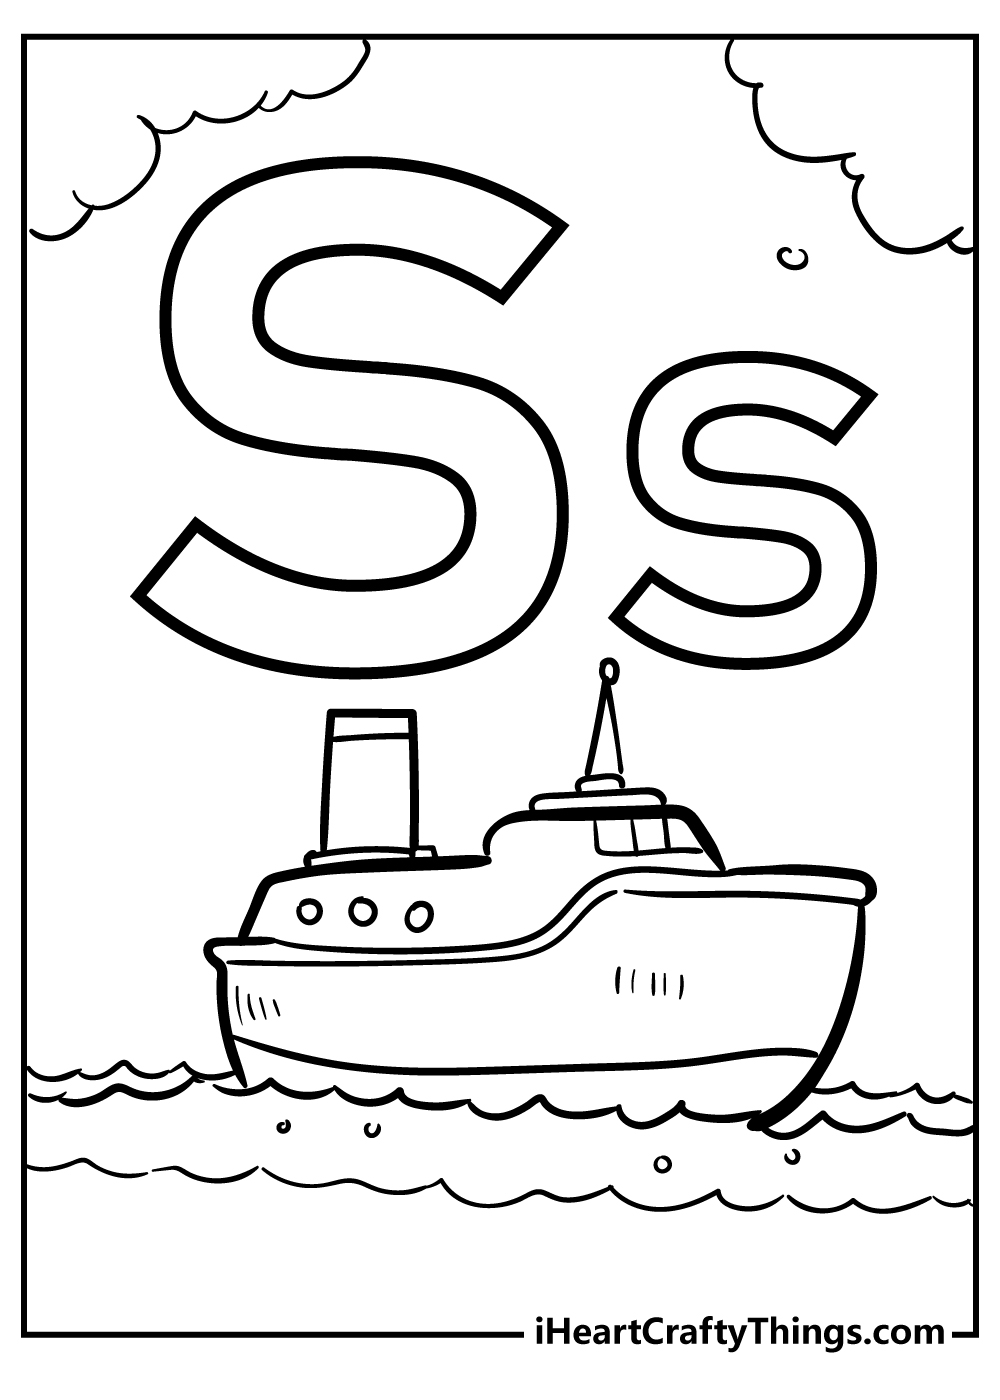 Letter S Coloring Pages for adults free printable